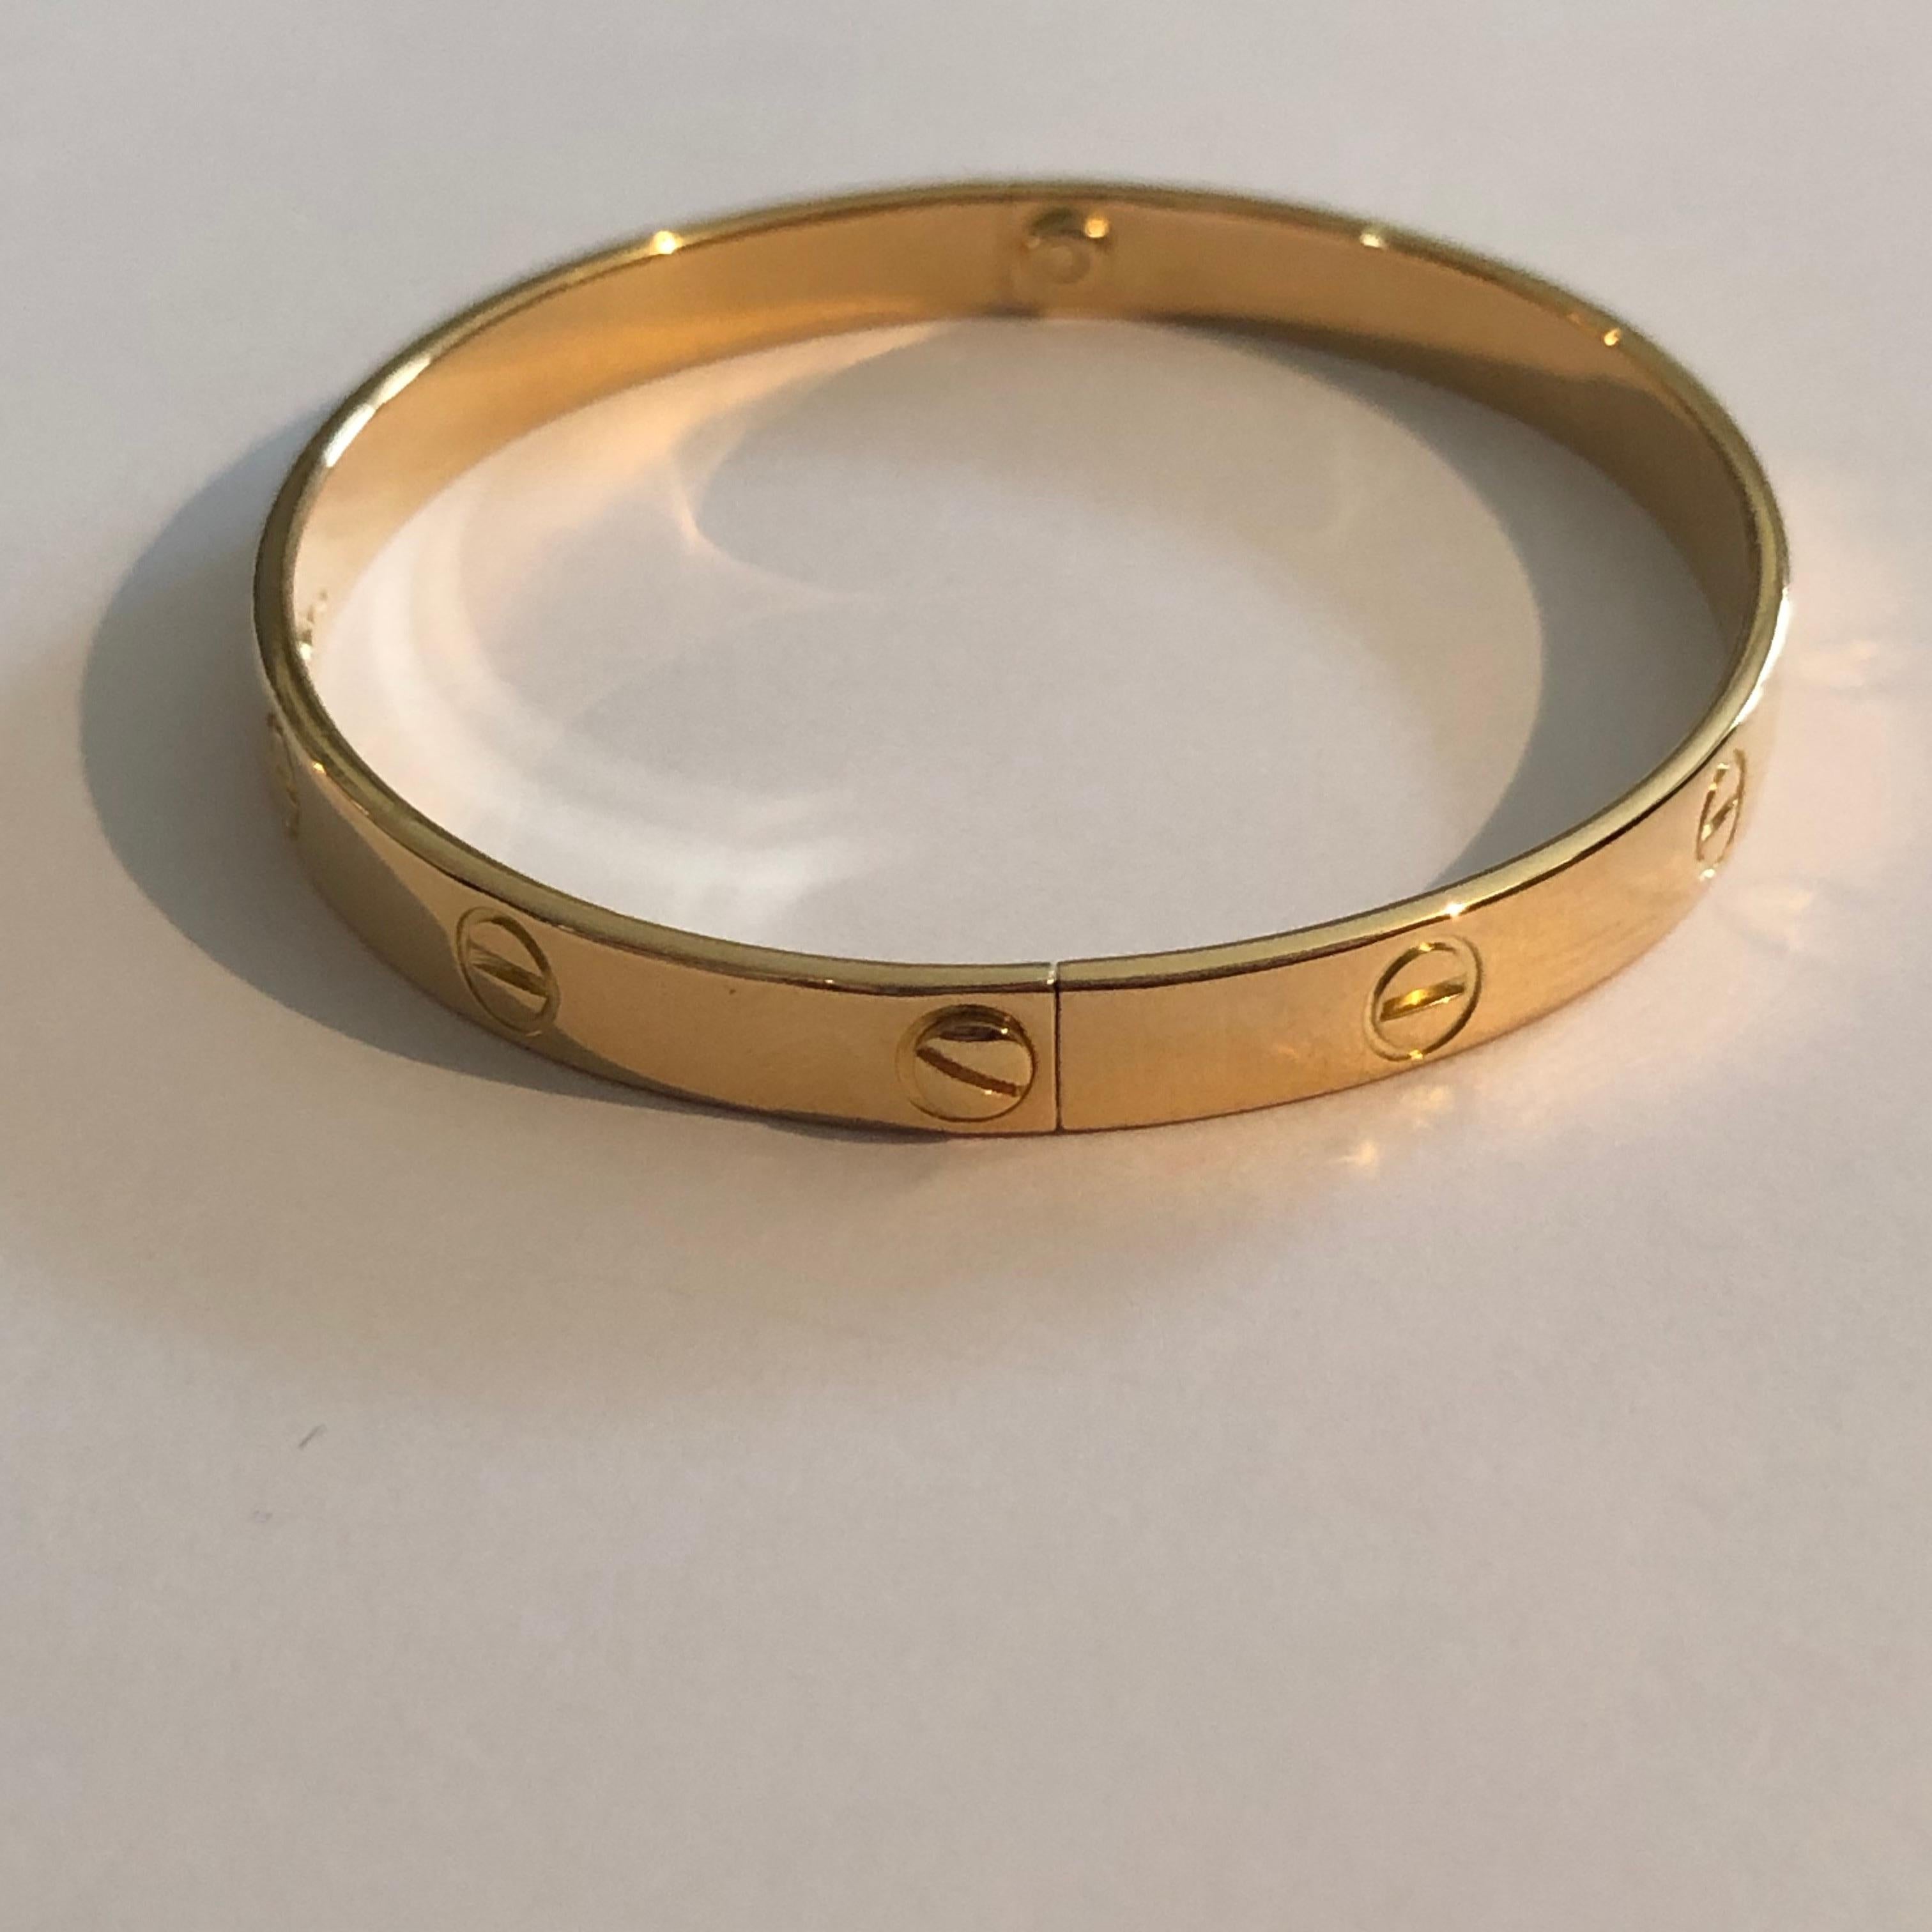 Great Love Bracelet by Cartier. 
First version in yellow gold 18K from 1970s. 

AS NEW : bracelet has just been polished and screws are new. 

Size is 20. It is signed and stamped (for gold and Cartier's hand).

Still on sale at Cartier for 6